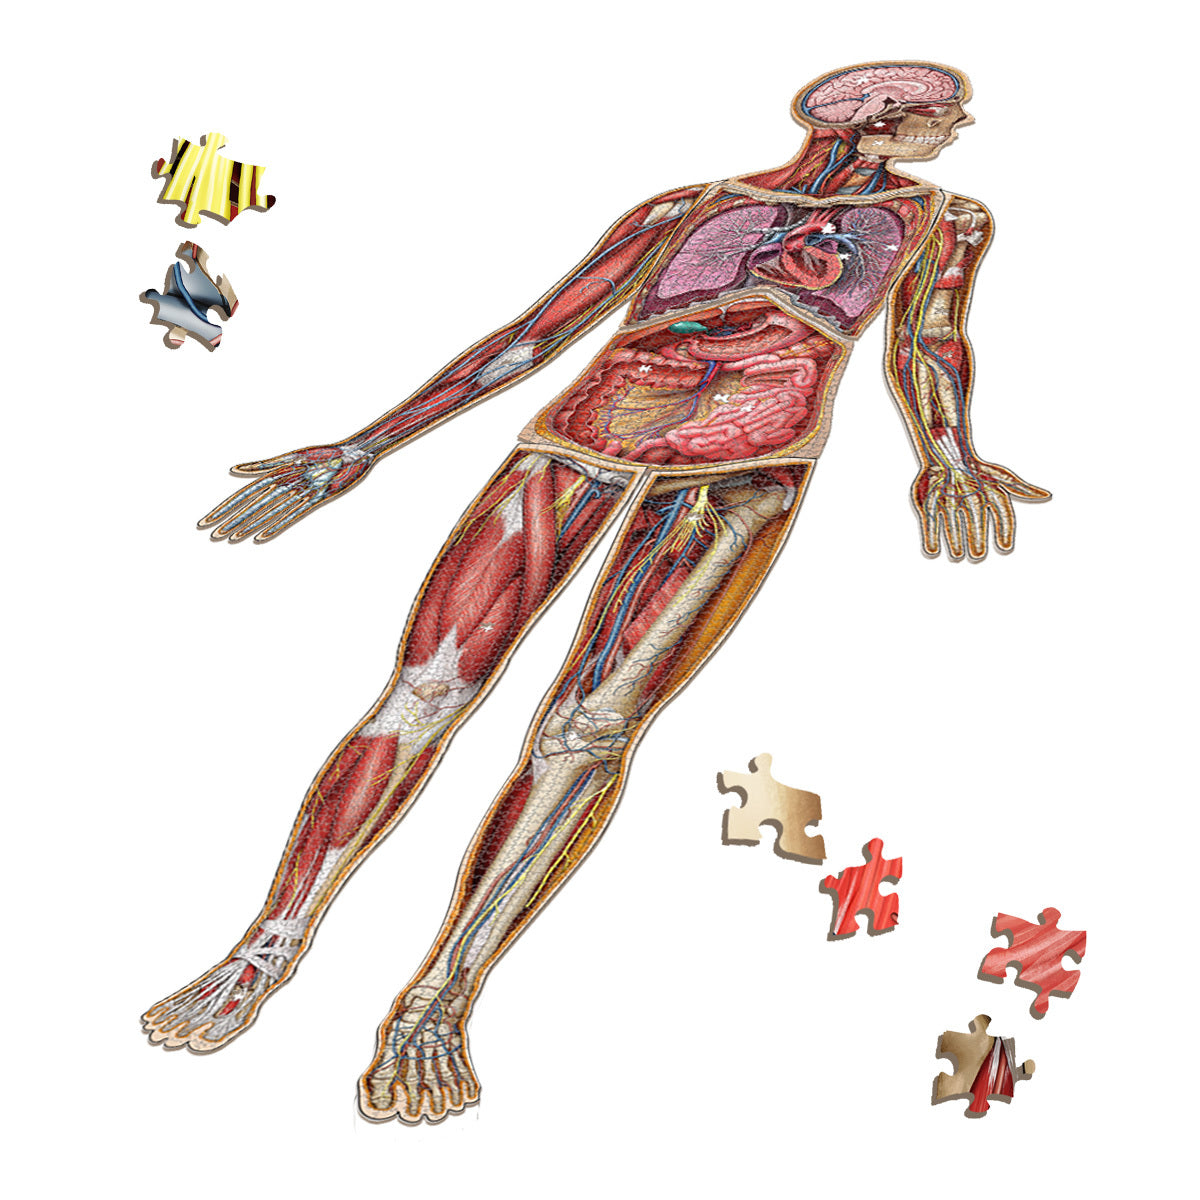 Human Full Body Anatomy Jigsaw Puzzles Bundle | Unique Shaped Science Puzzles with Accurate Medical Illustrations